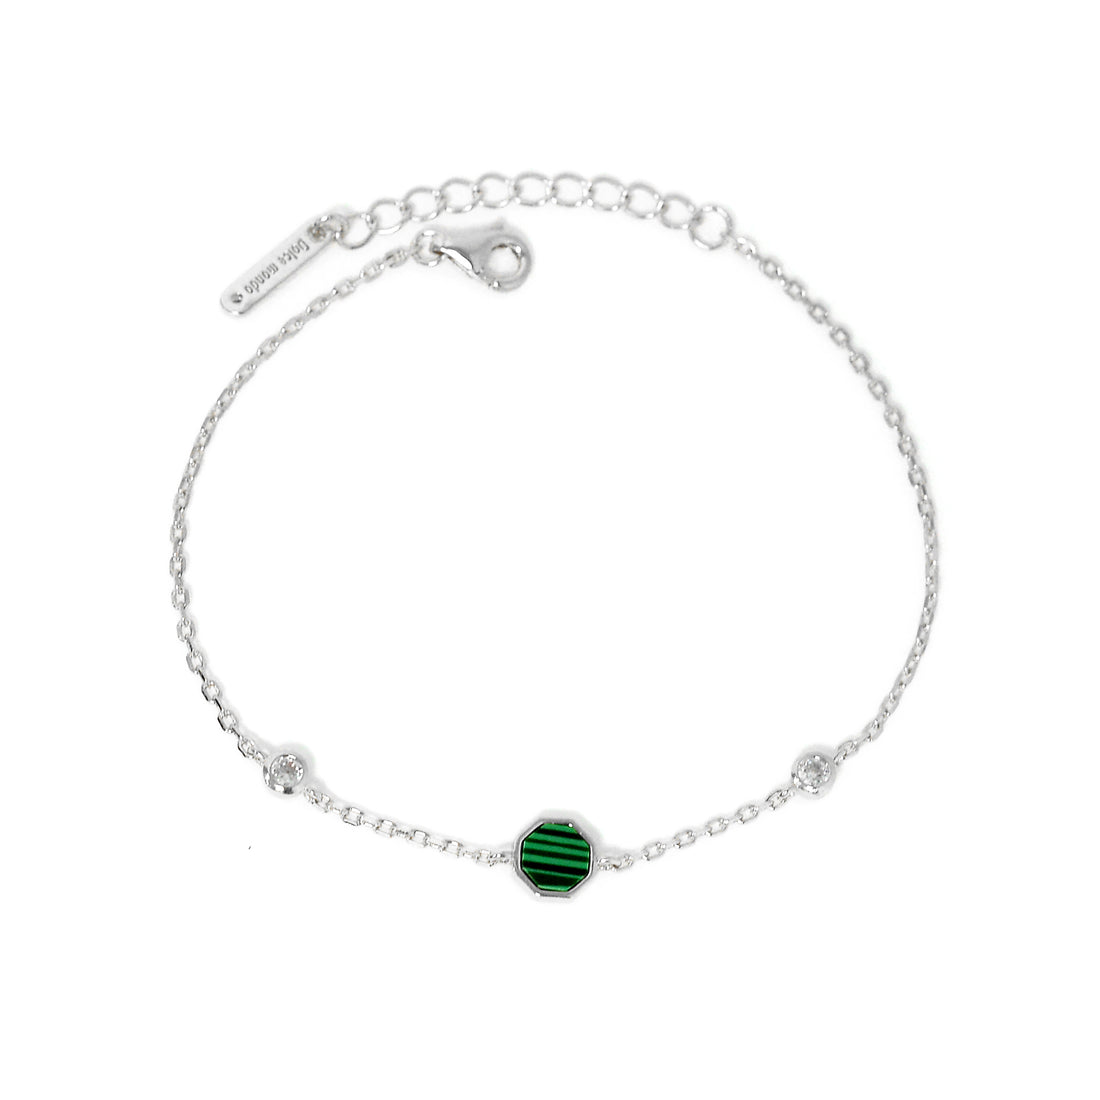 Stunning Silver Zircon Bracelet with Circular Shaped Malachite and Cubic Zircons